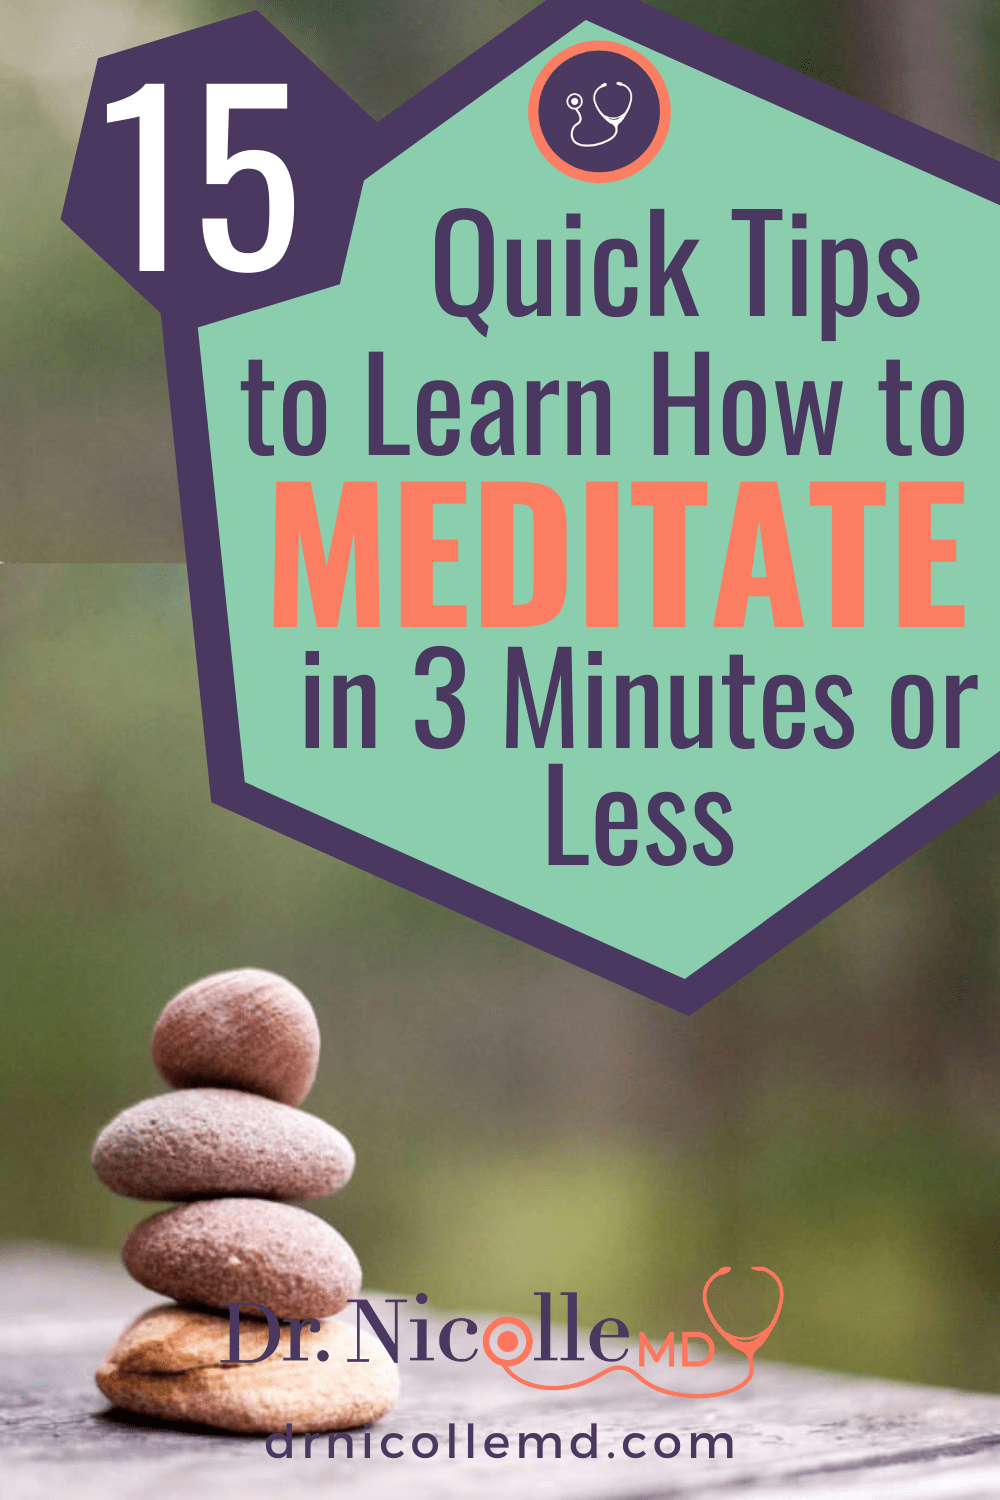 15 Quick Tips to Learn How to Meditate in 3 Minutes or Less